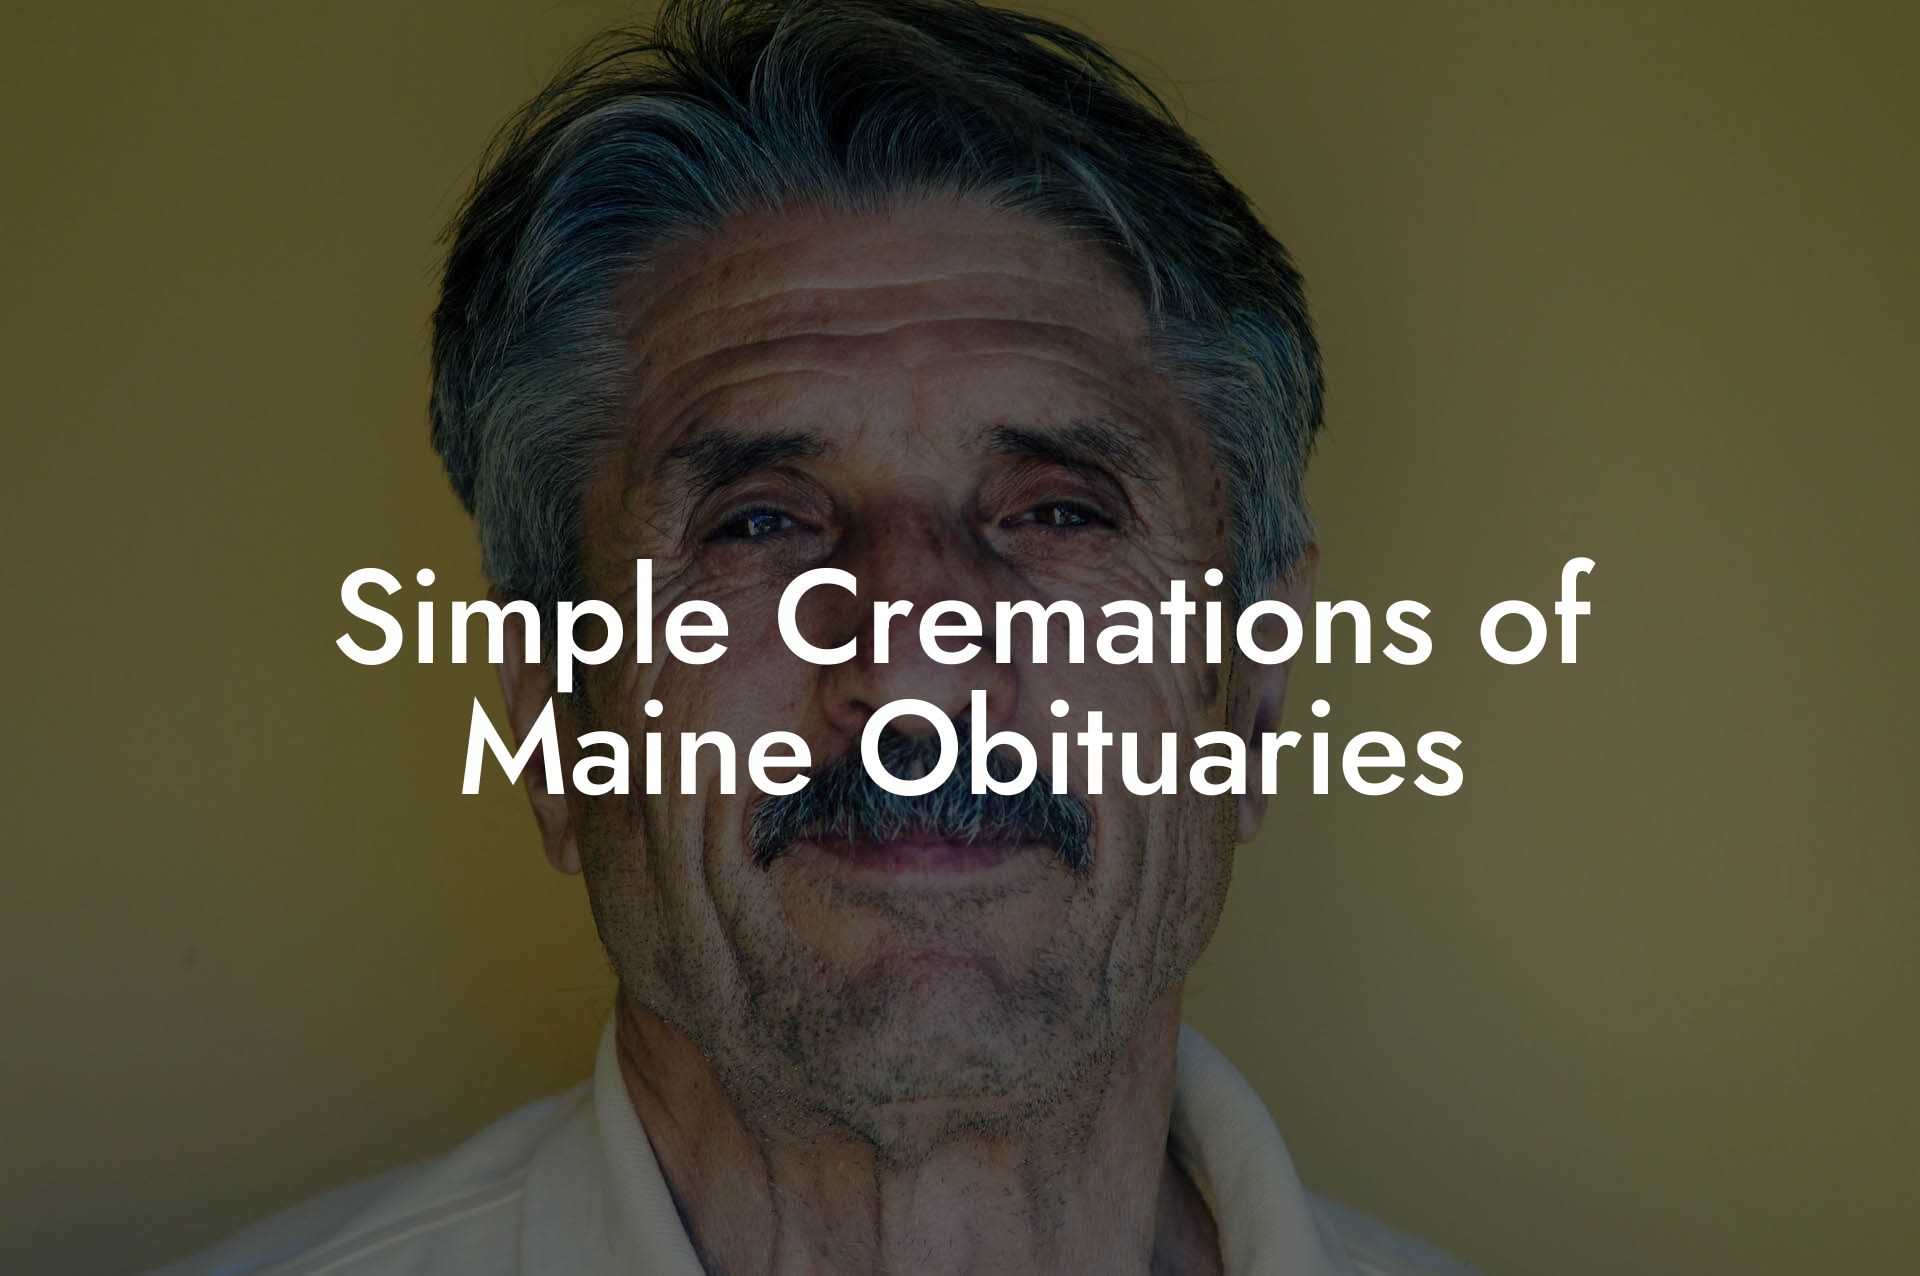 Simple Cremations of Maine Obituaries